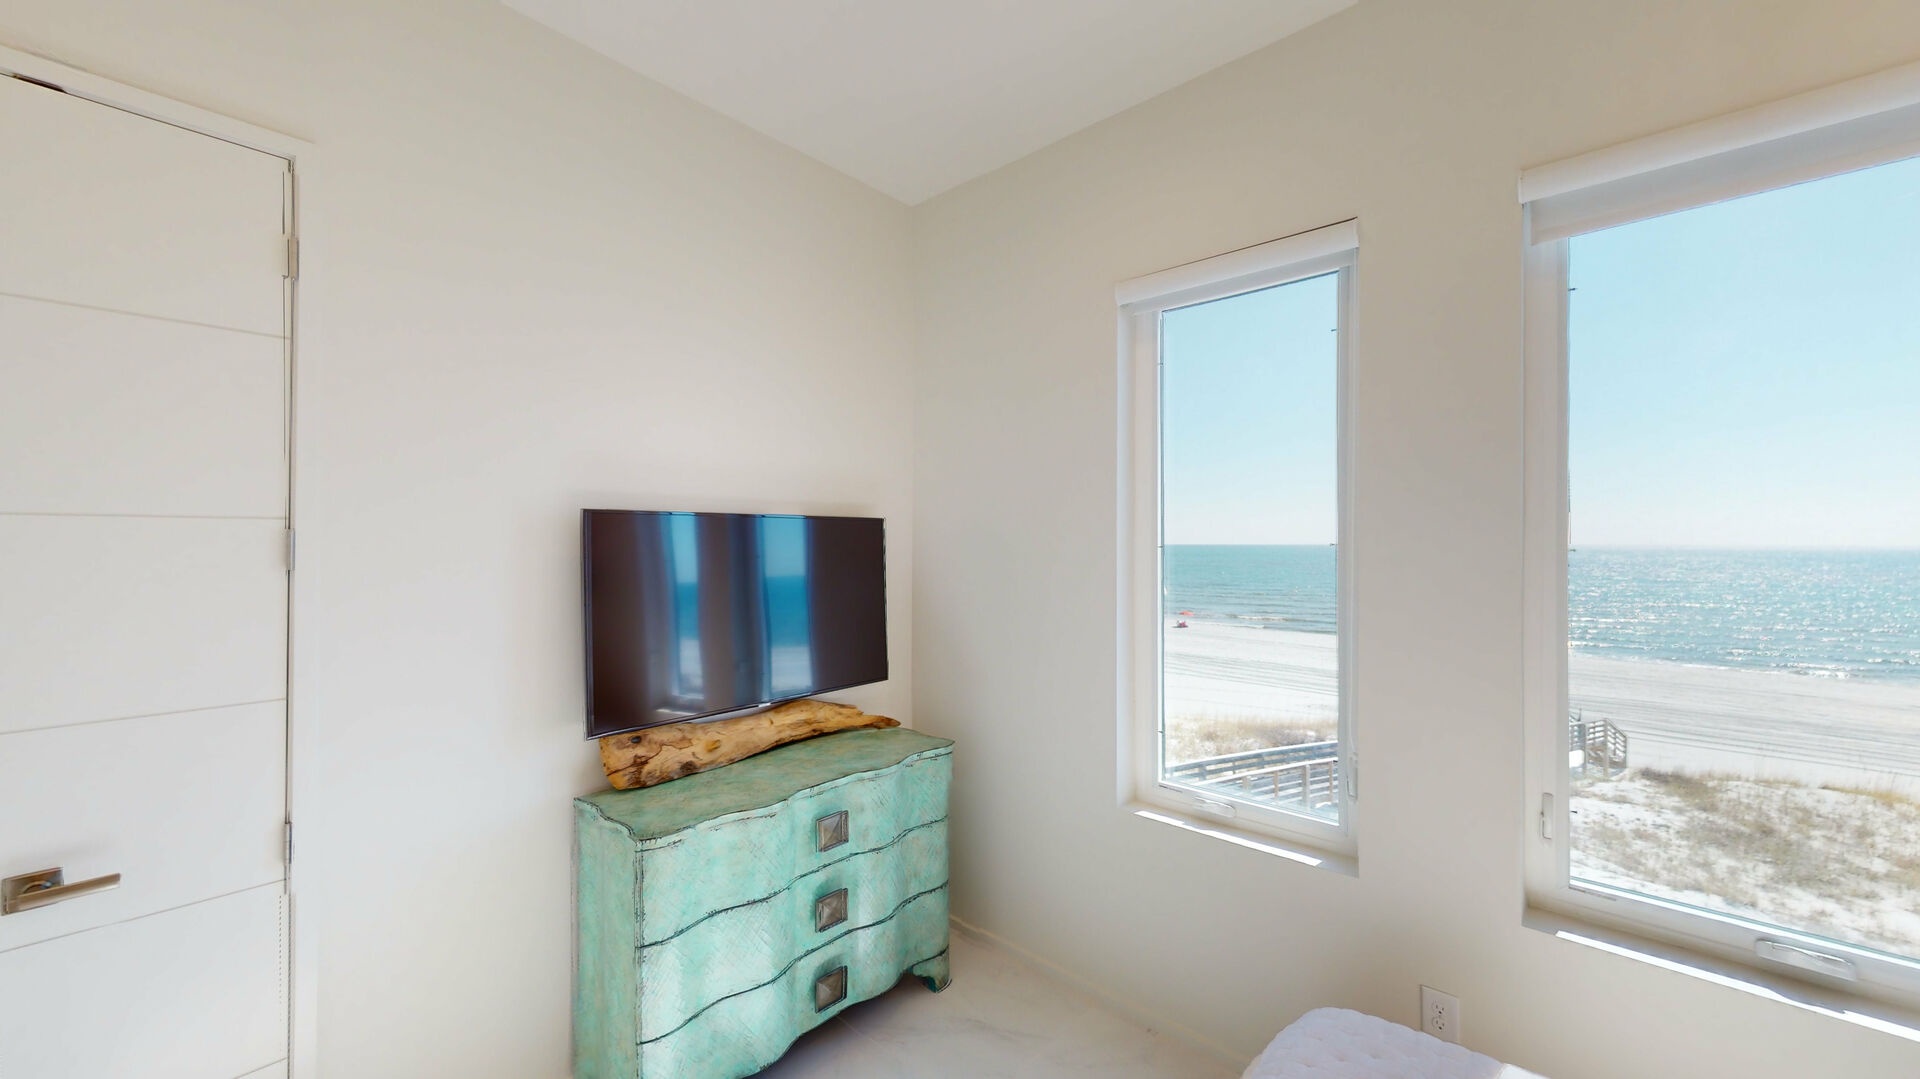 Bedroom 1 has a TV, Gulf views and a private bathroom